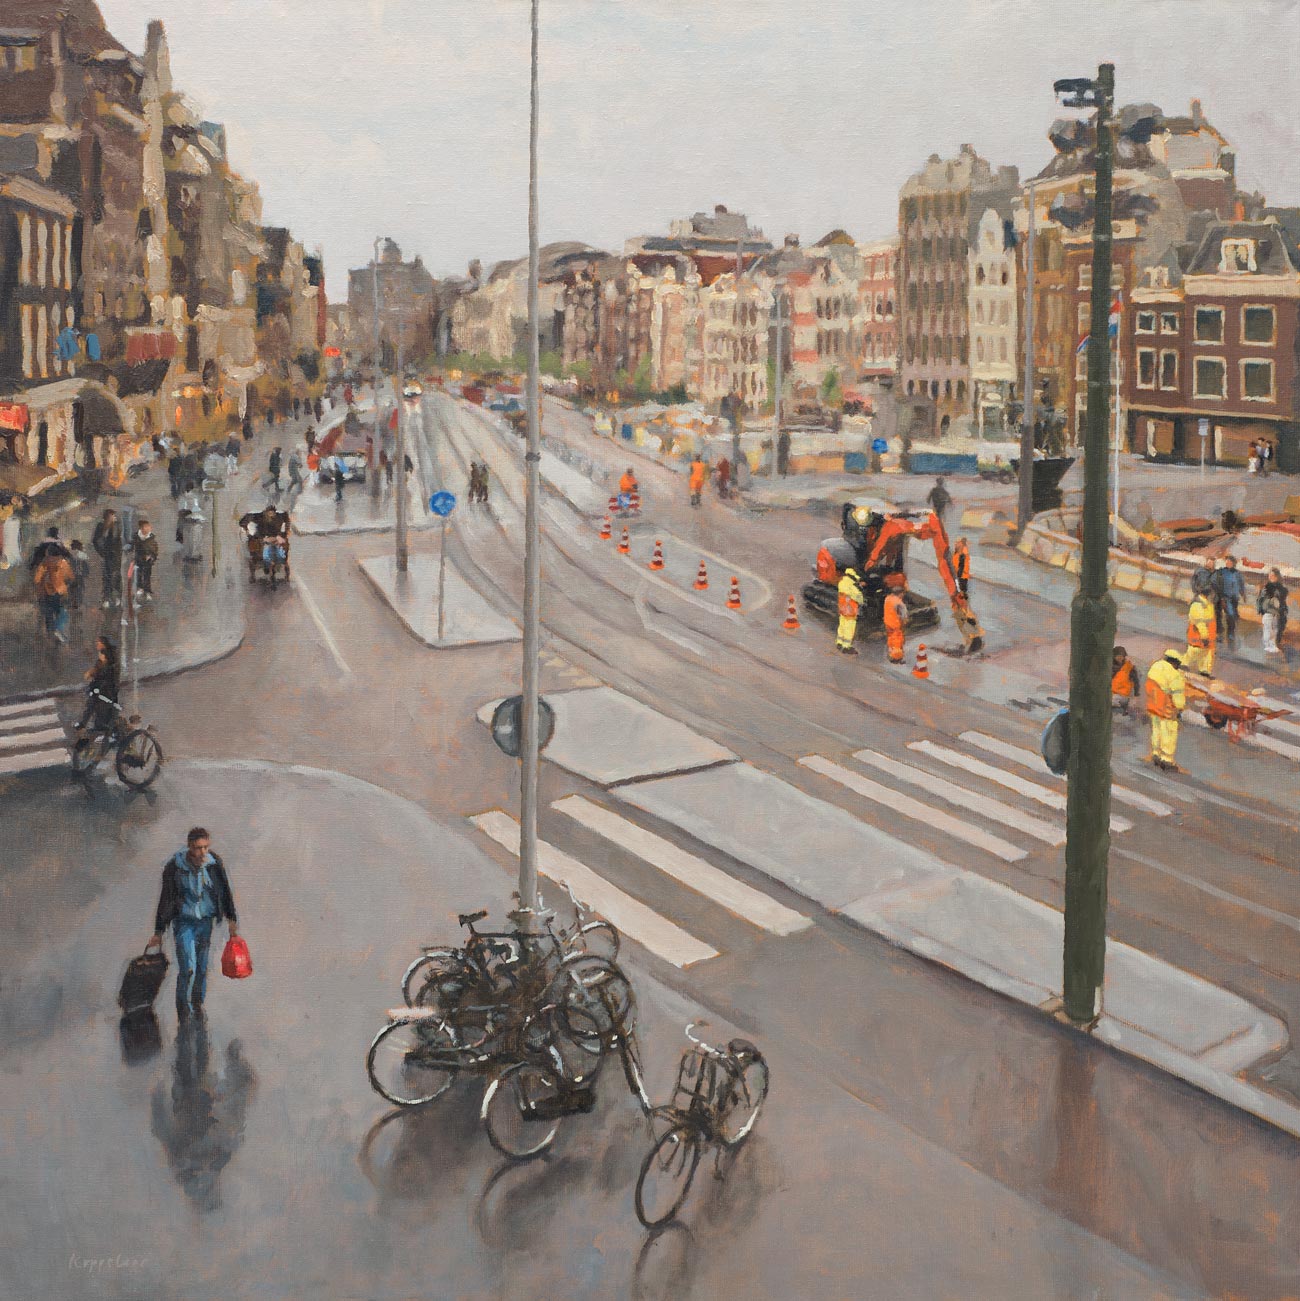 cityscape: 'Road workers at the Rokin' oil and acrylics on canvas by Dutch painter Frans Koppelaar.